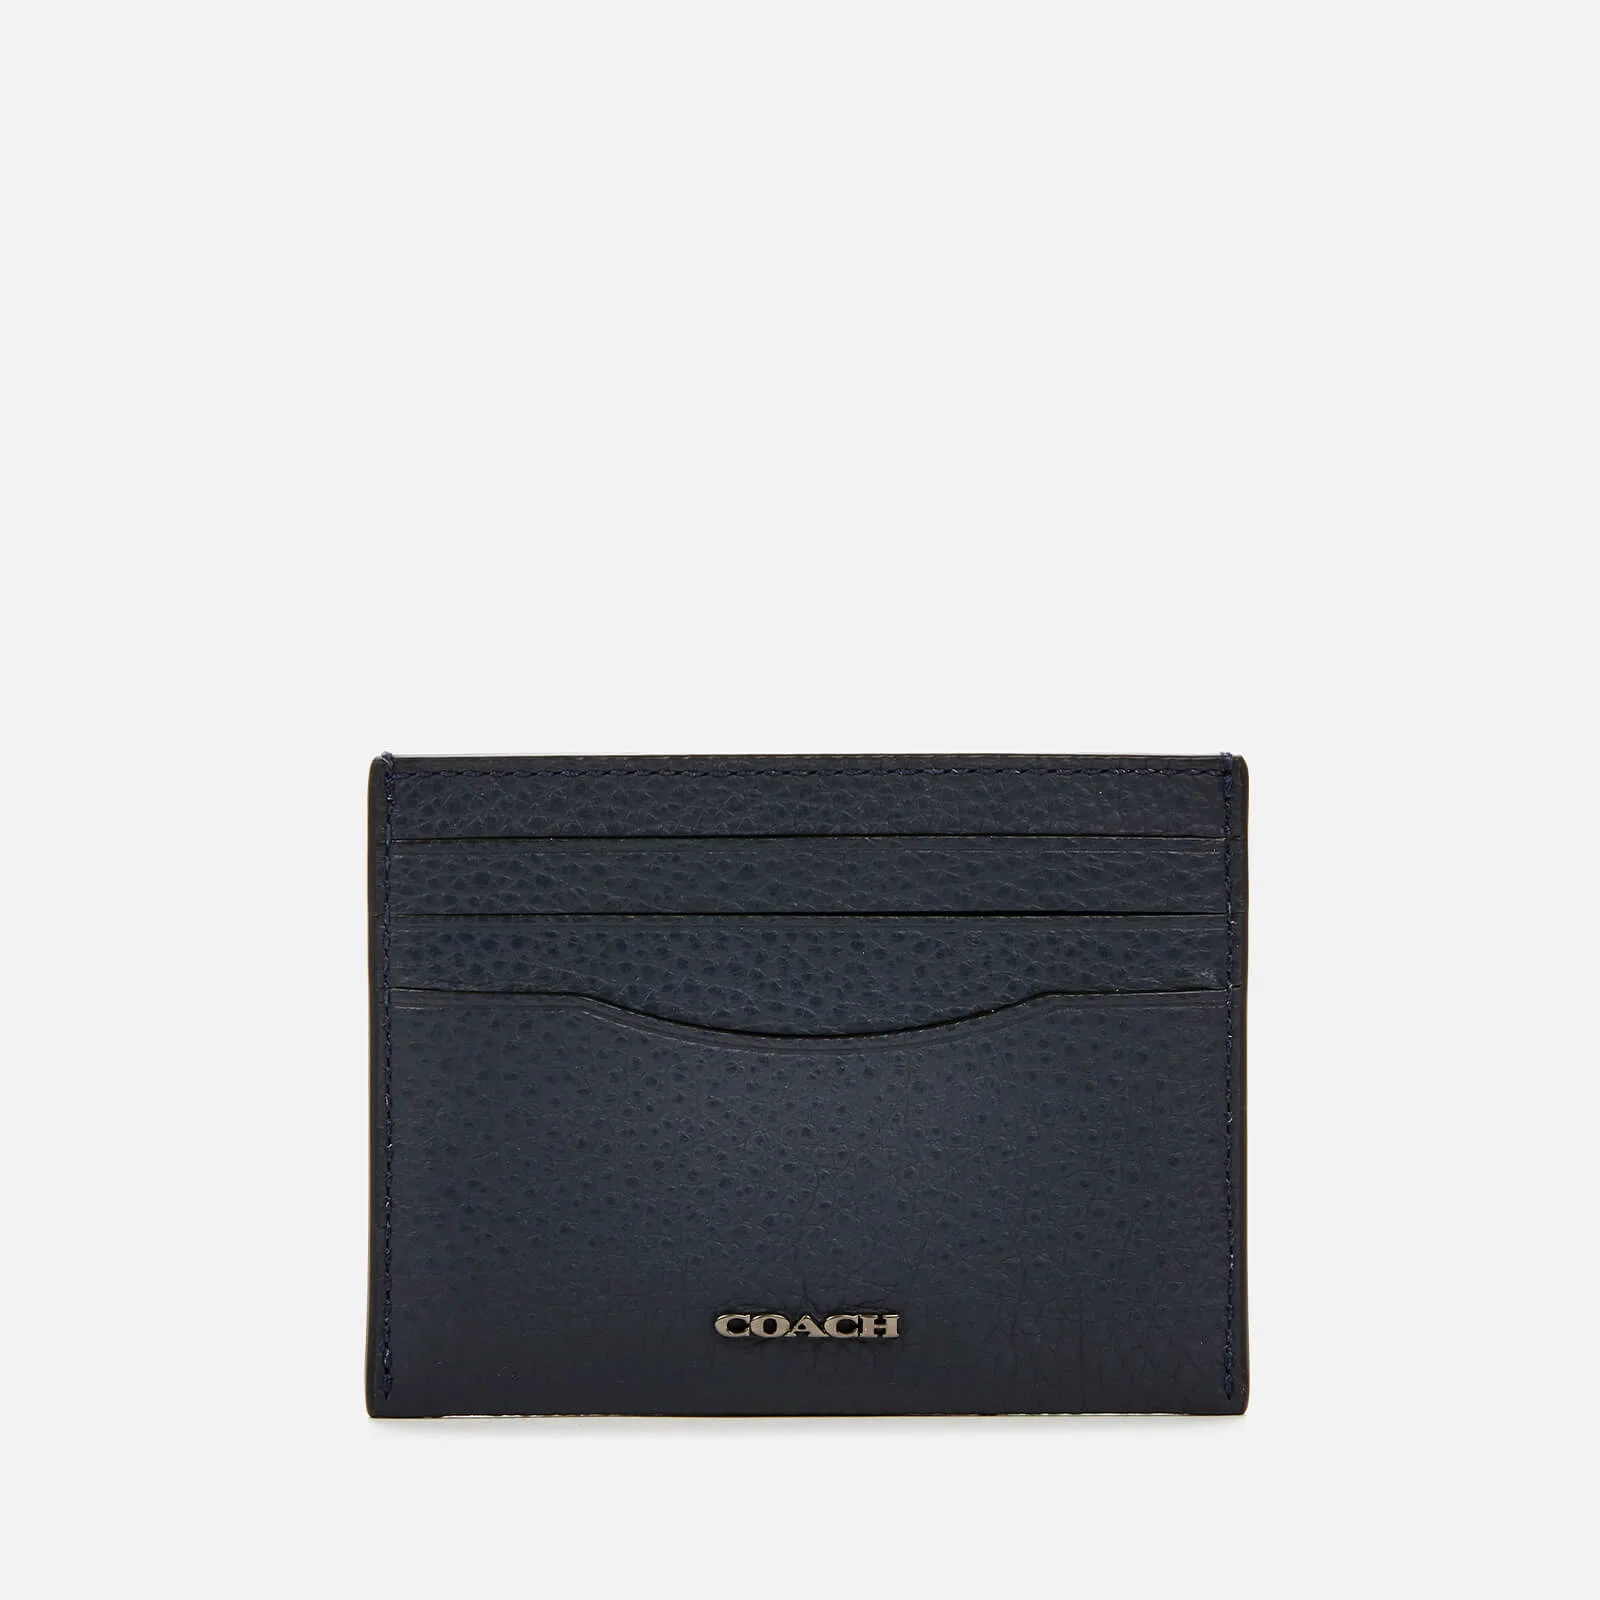 Coach Men's Pebble Leather Card Case - Midnight Image 1